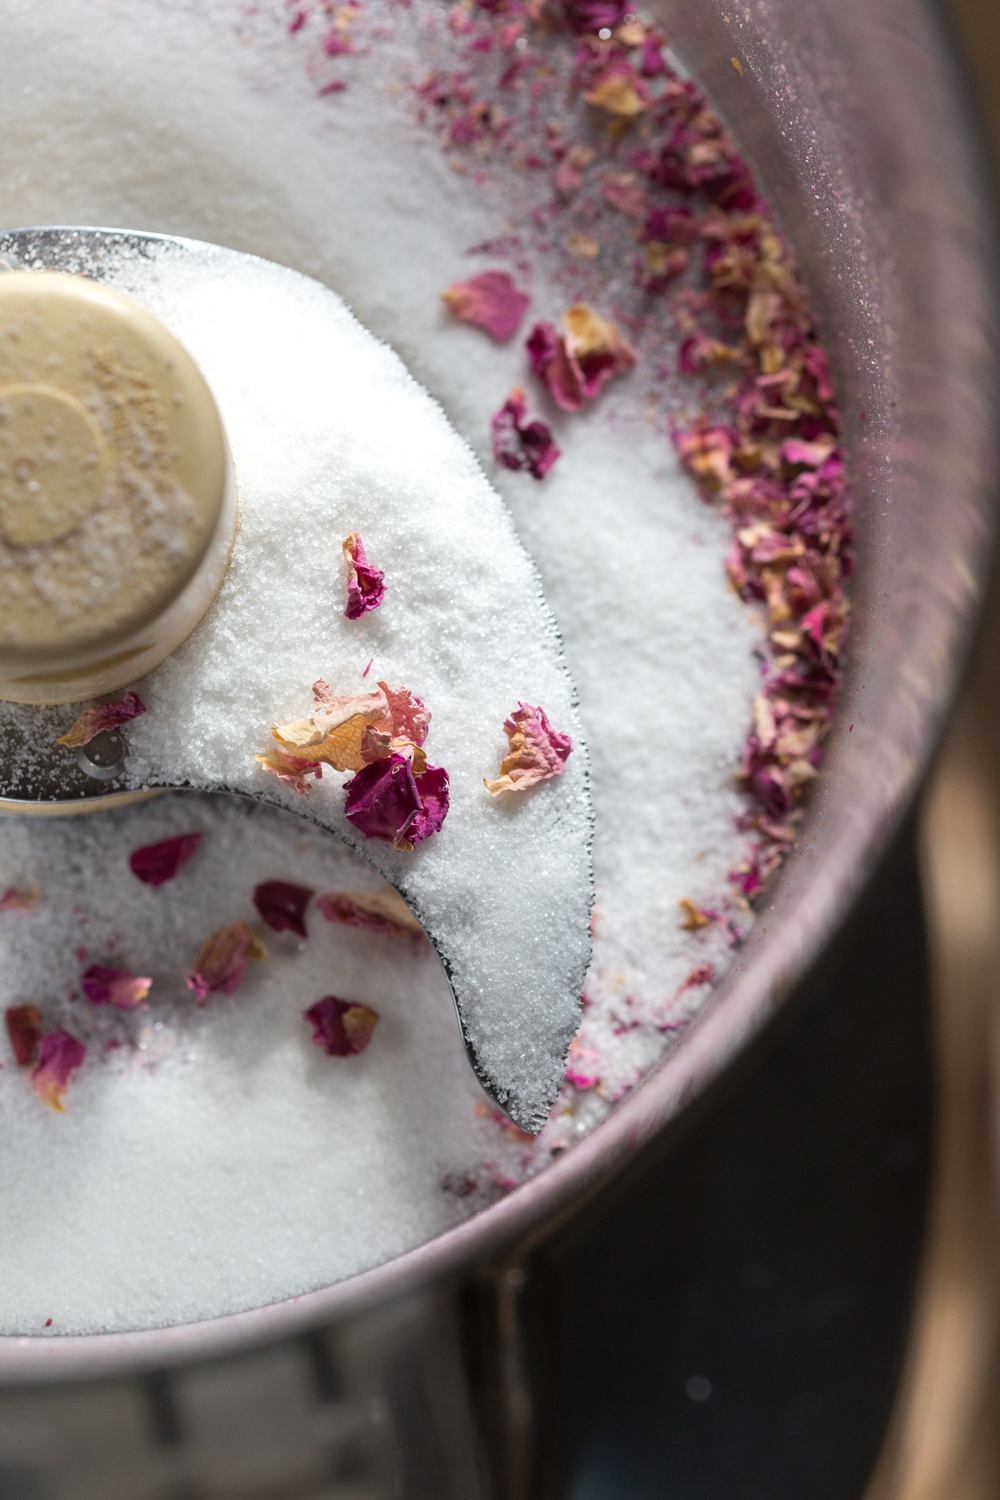 Grinding rose petals and sugar for Madeleines